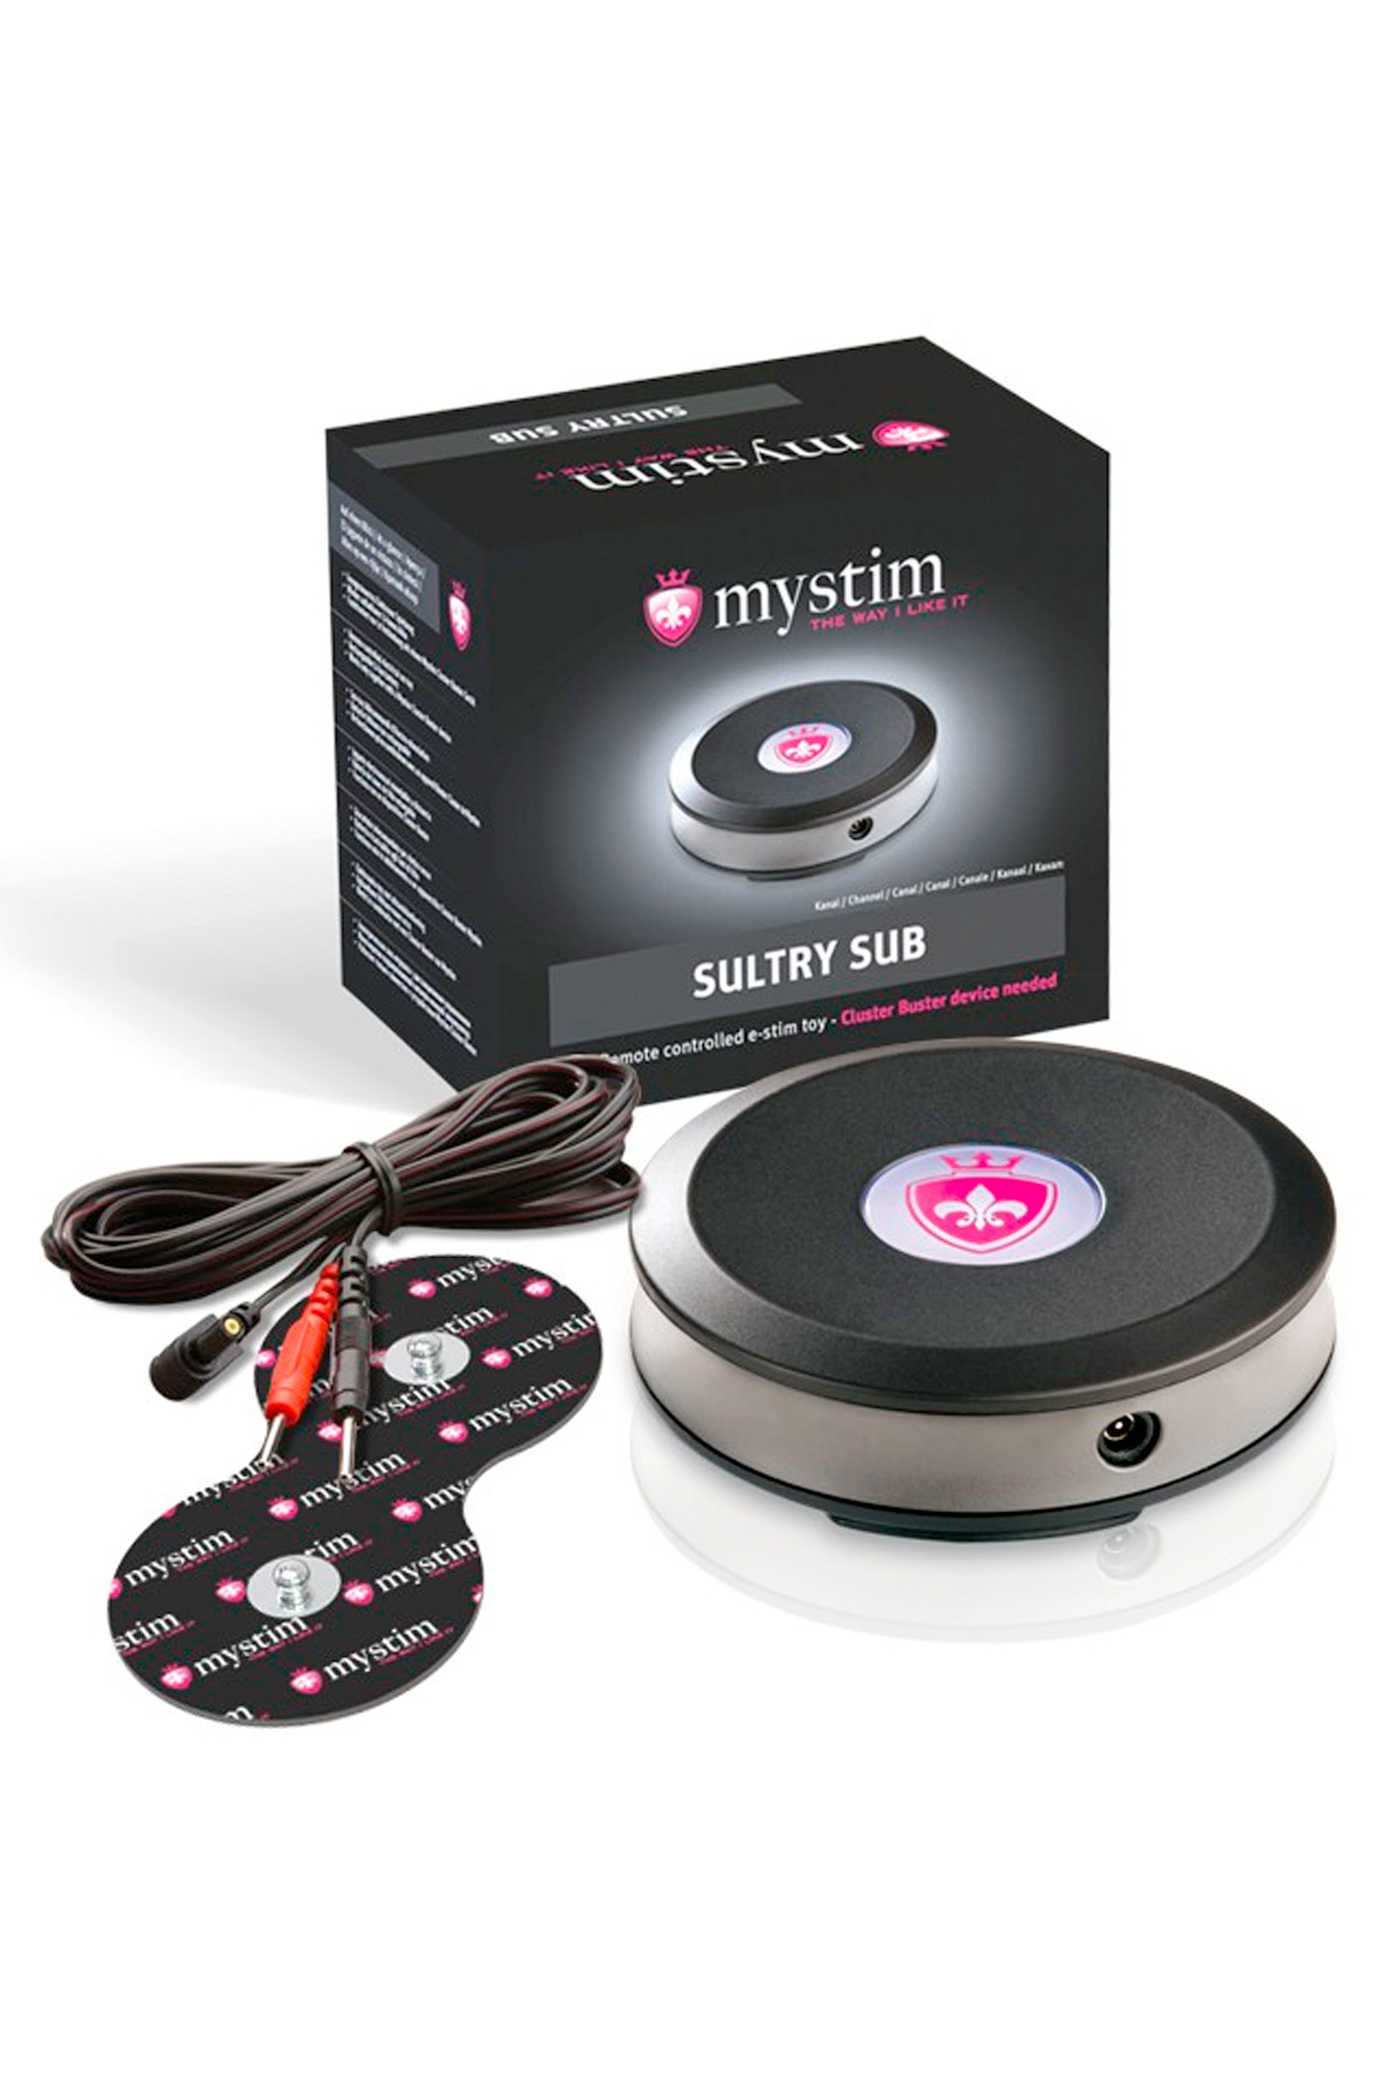 Mystim E-stimulator Sultry Subs Receiver Channel 2